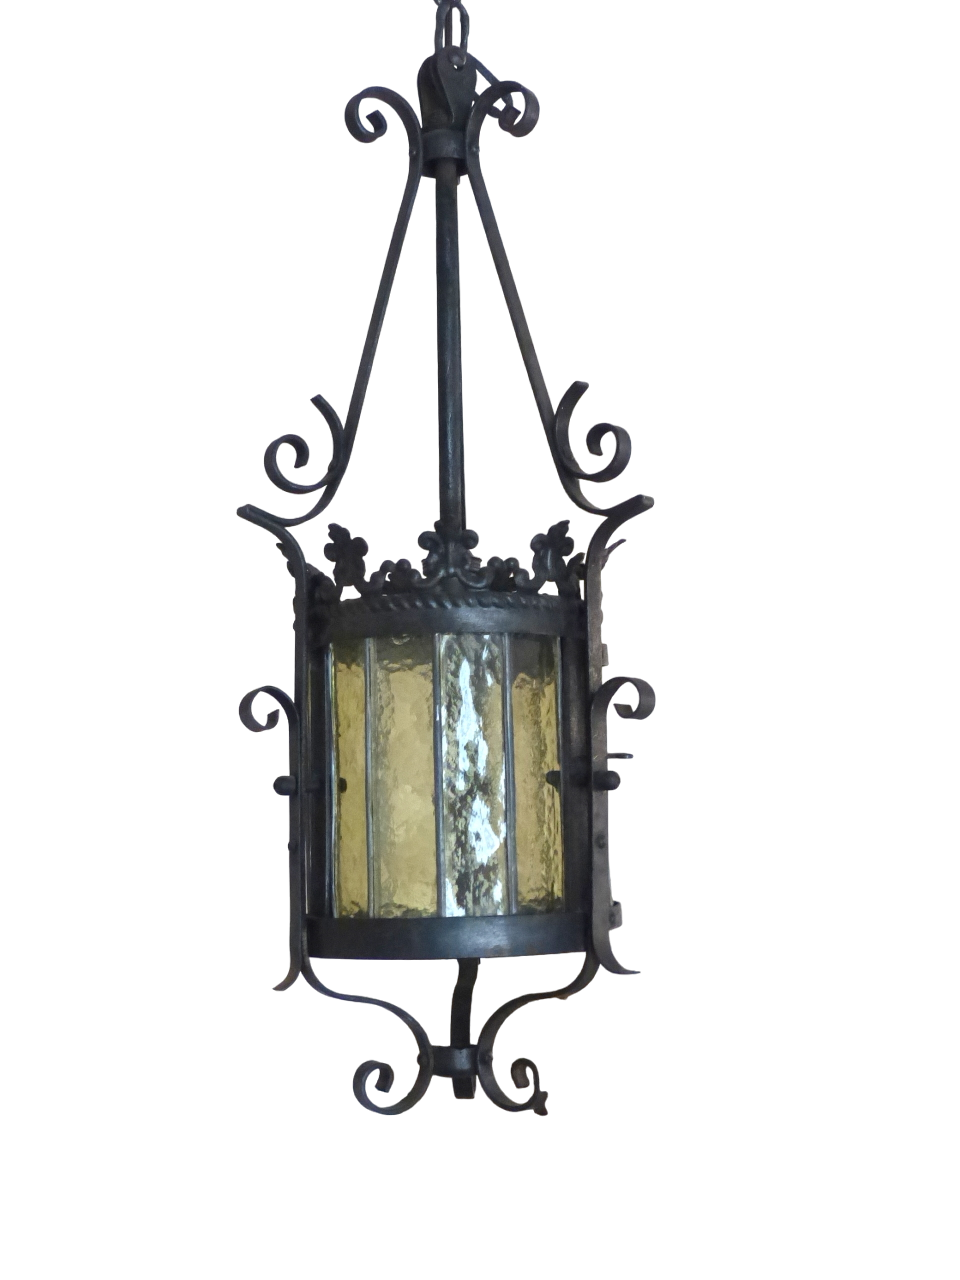 Charming French Lantern Gothic Castle Tole Iron Late 19TH Chandelier Ceiling